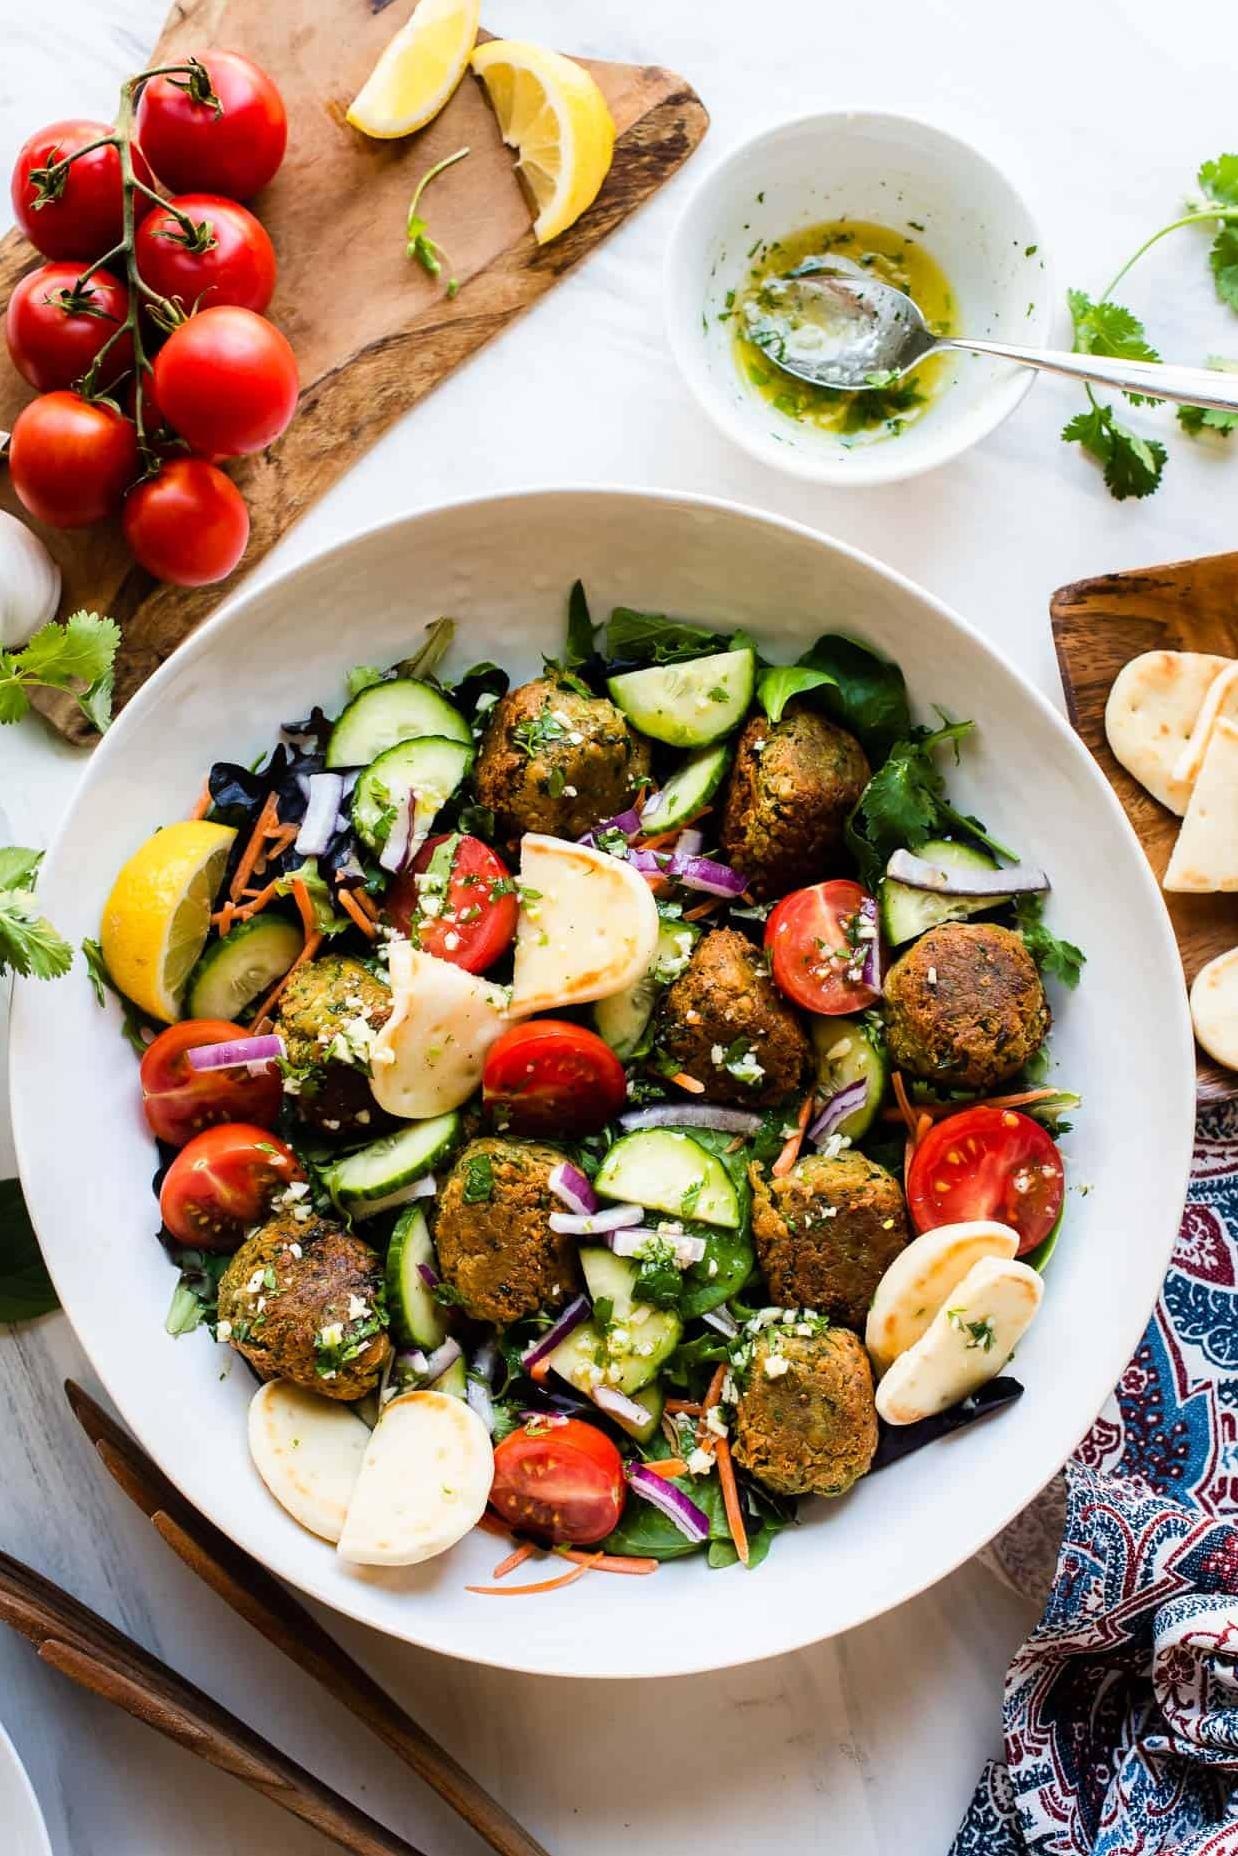  Our homemade falafels will be the star of this bowl.